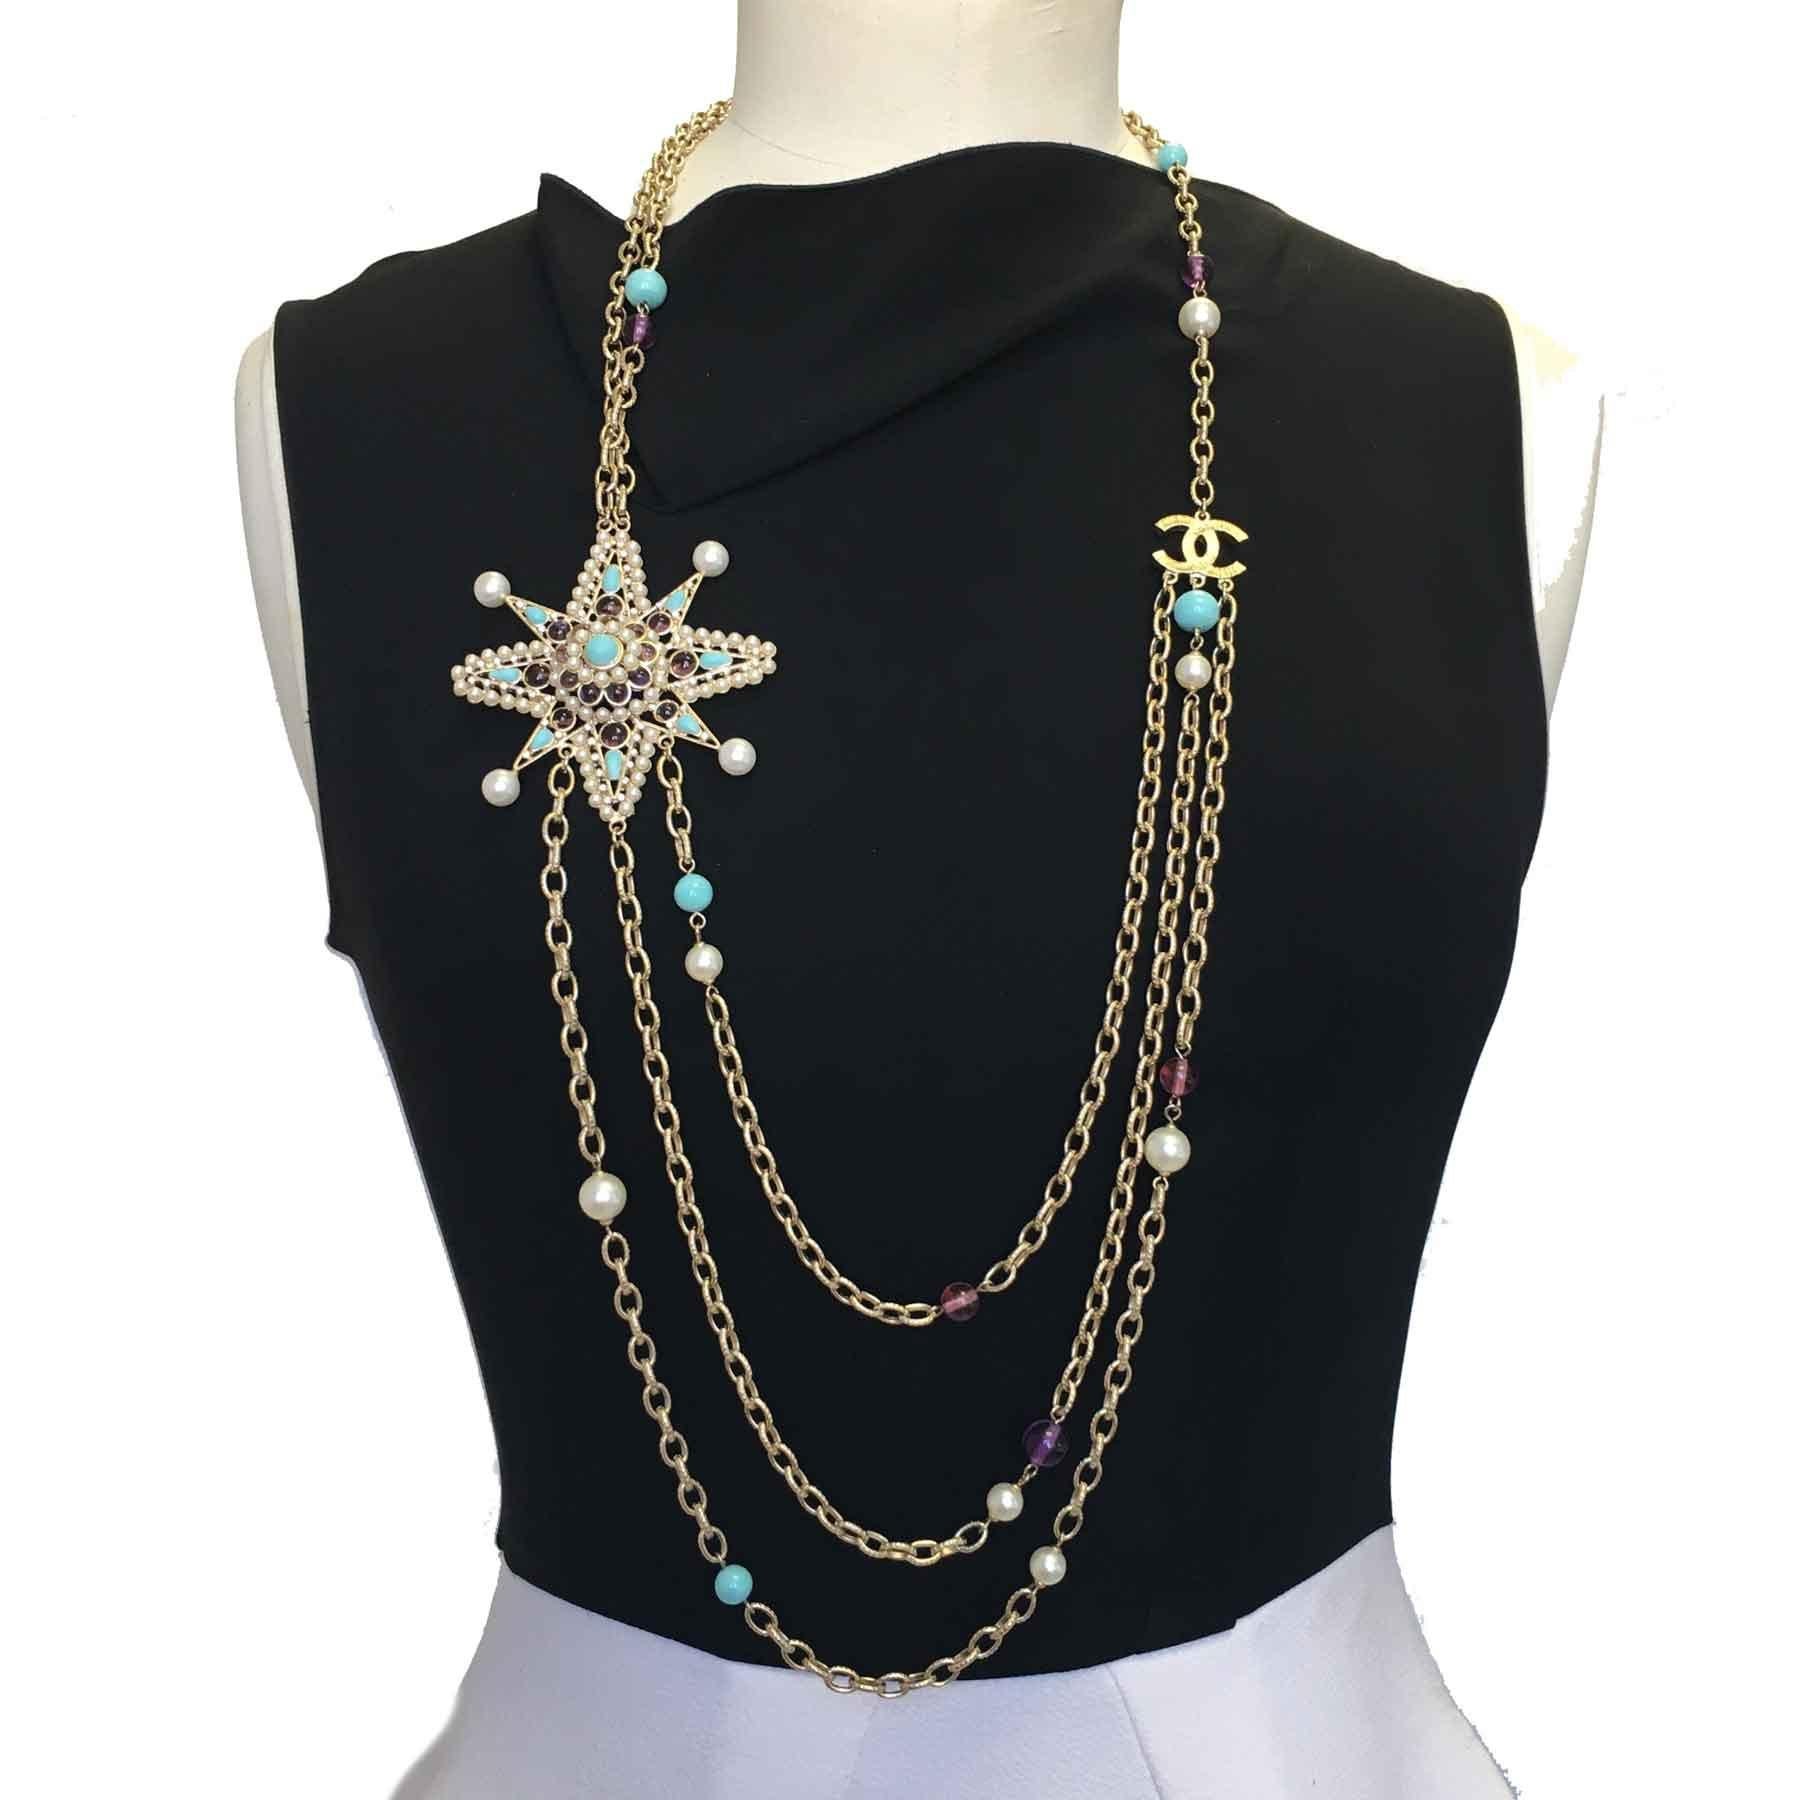 Couture! Splendid necklace Chanel 3 chains in pale gilt metal, pearls, mauve molten glass. Beautiful star-shaped jewel set with pearly, shiny pearls and turquoise and mauve molten glass beads.

Never worn. Made in France, spring 2008